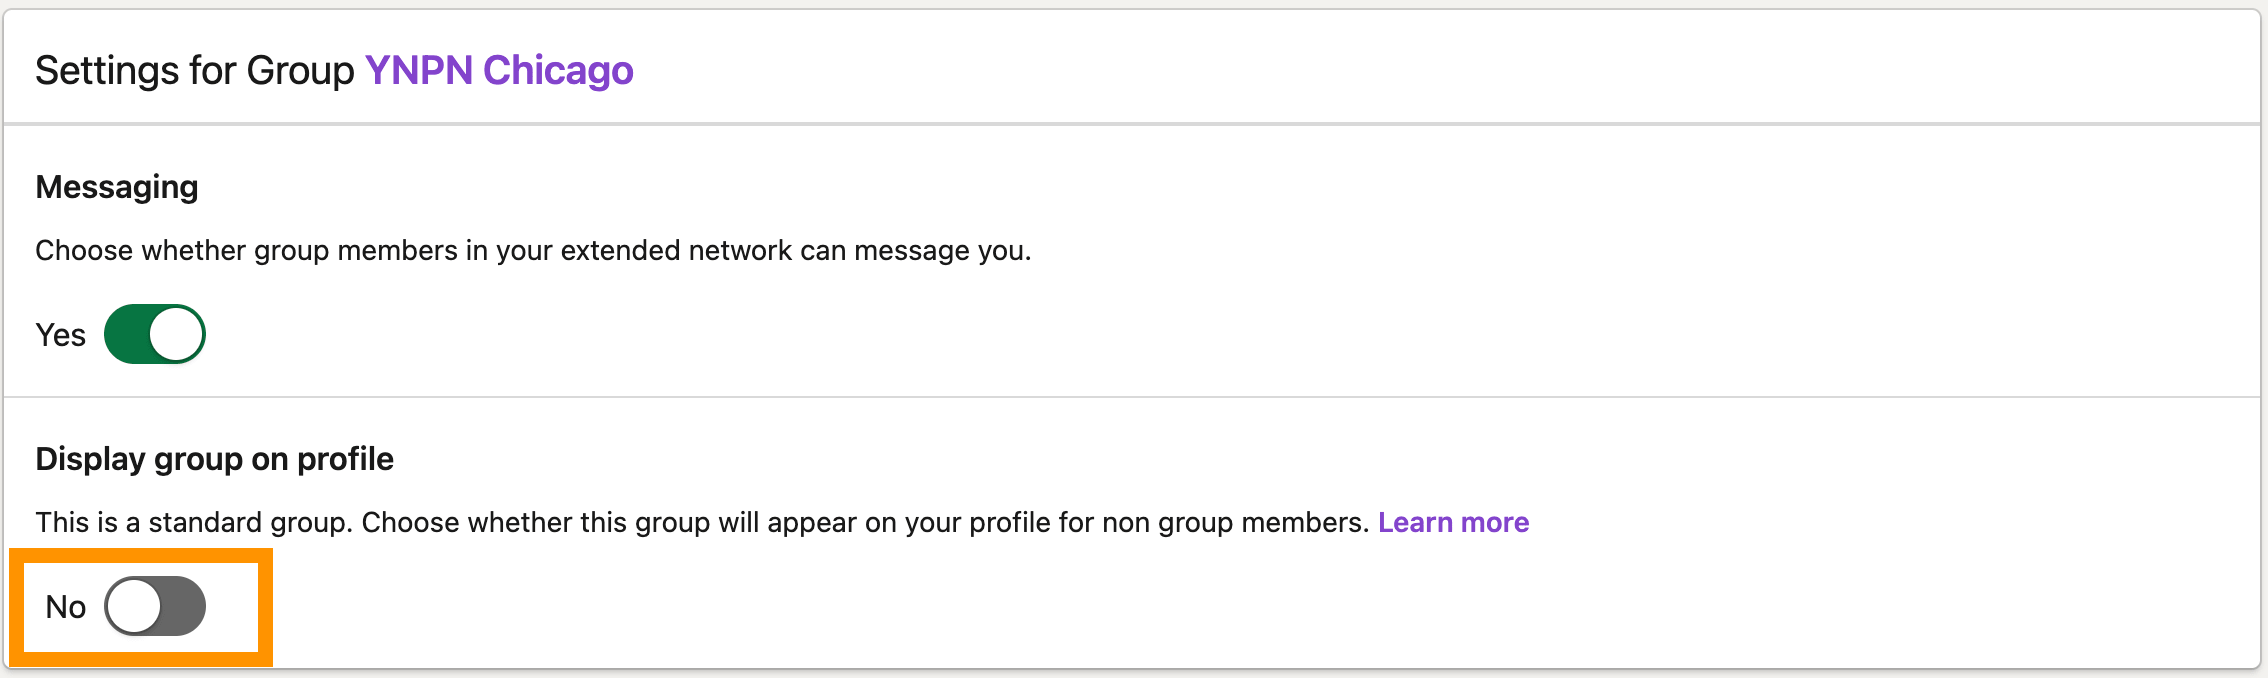 the settings interface for a linkedin group